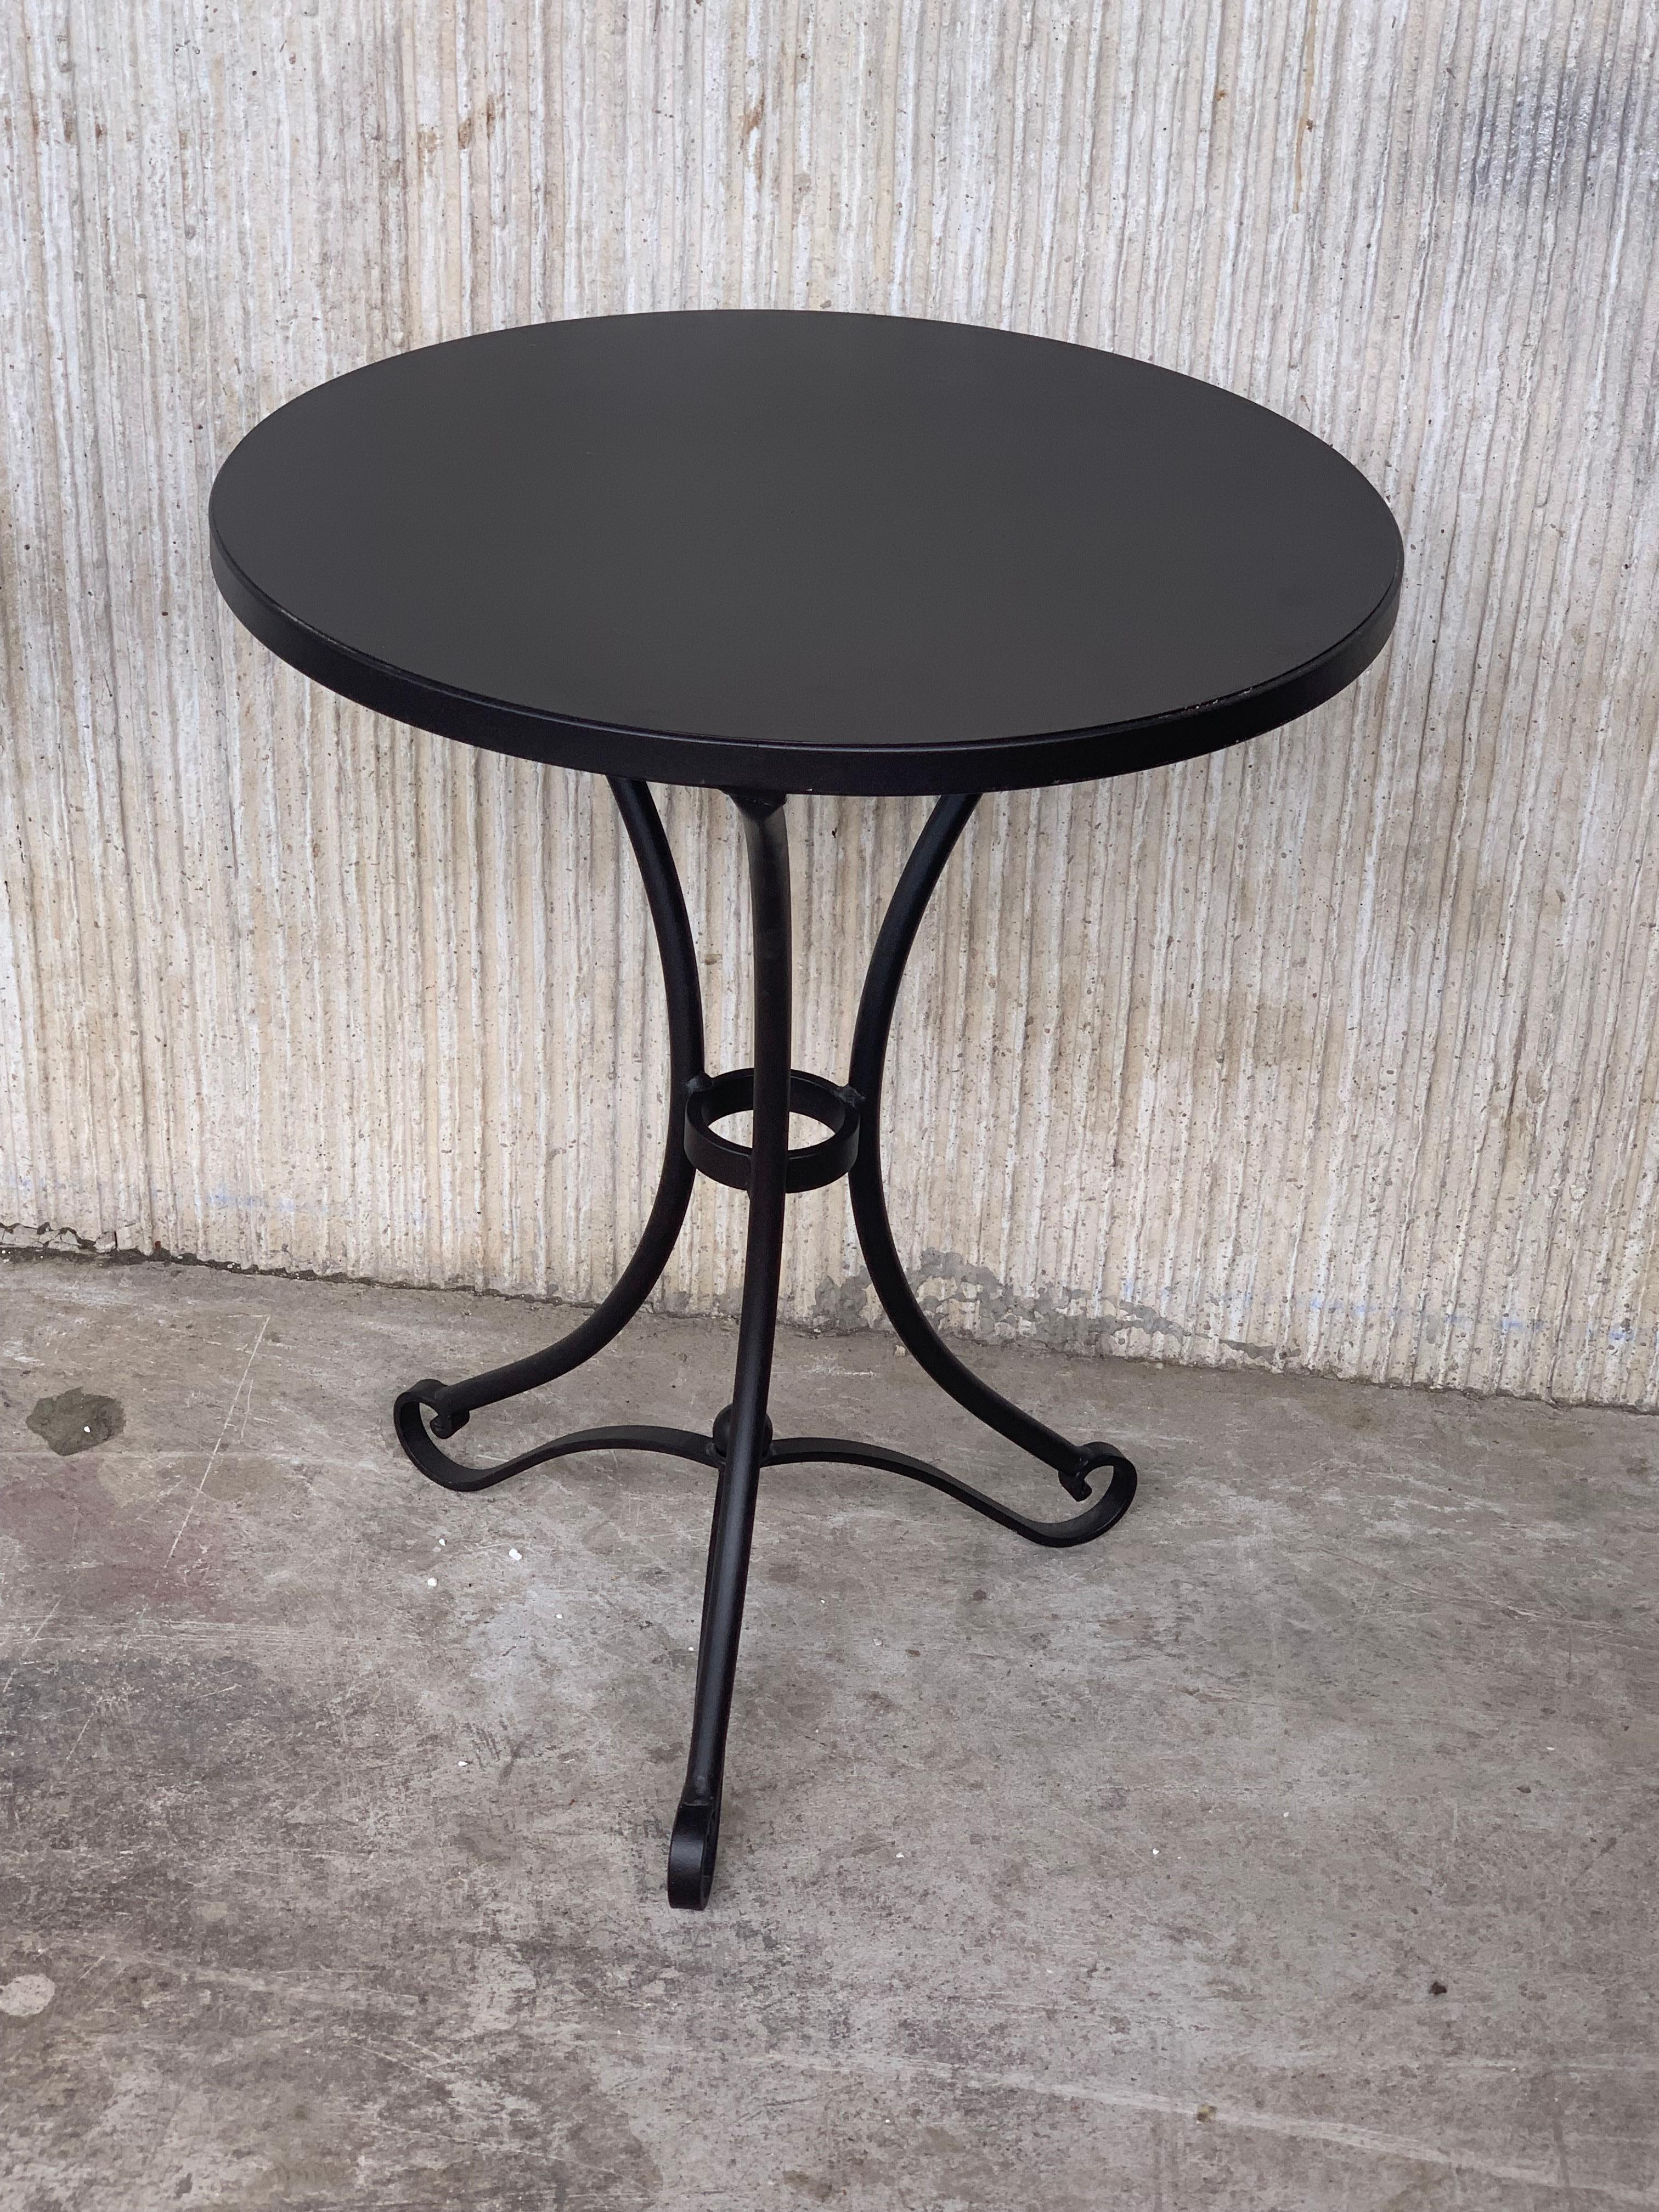 French style cast iron base with iron top garden table or bistro table.

Finely detailed cast iron base & top

Indoor and outdoor.